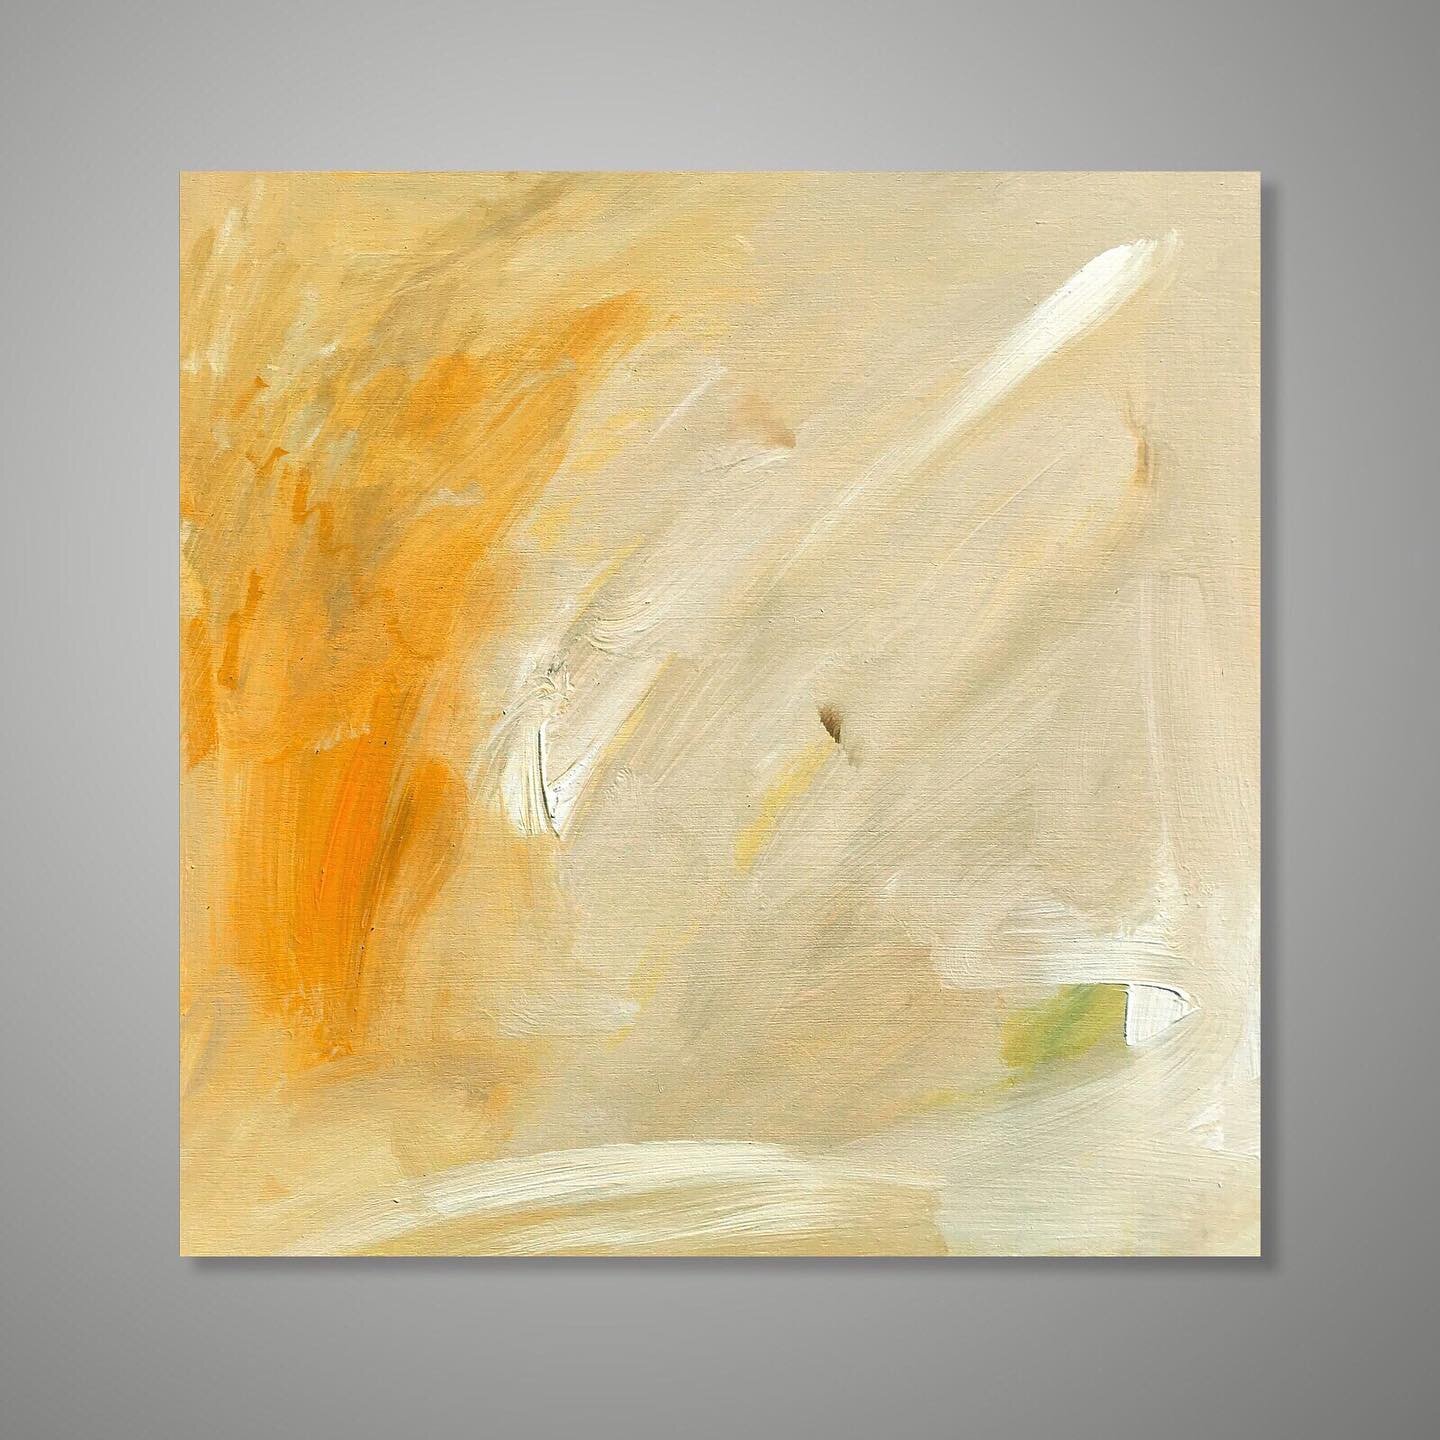 Untitled, 2004020. Acrylic on wooden panel, 30 x 30 cm. Available.